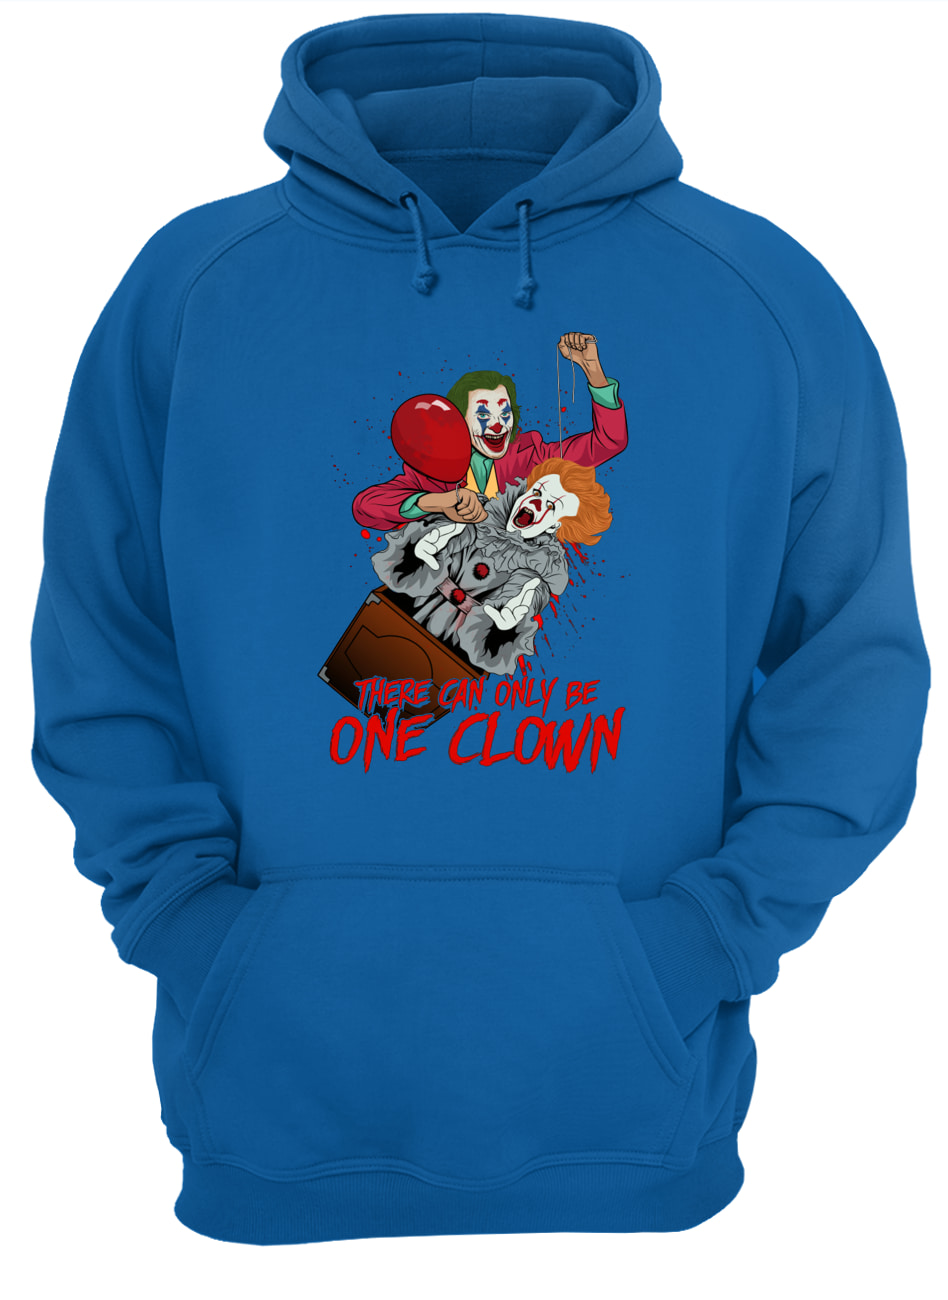 There can only be one clown pennywise and joker hoodie